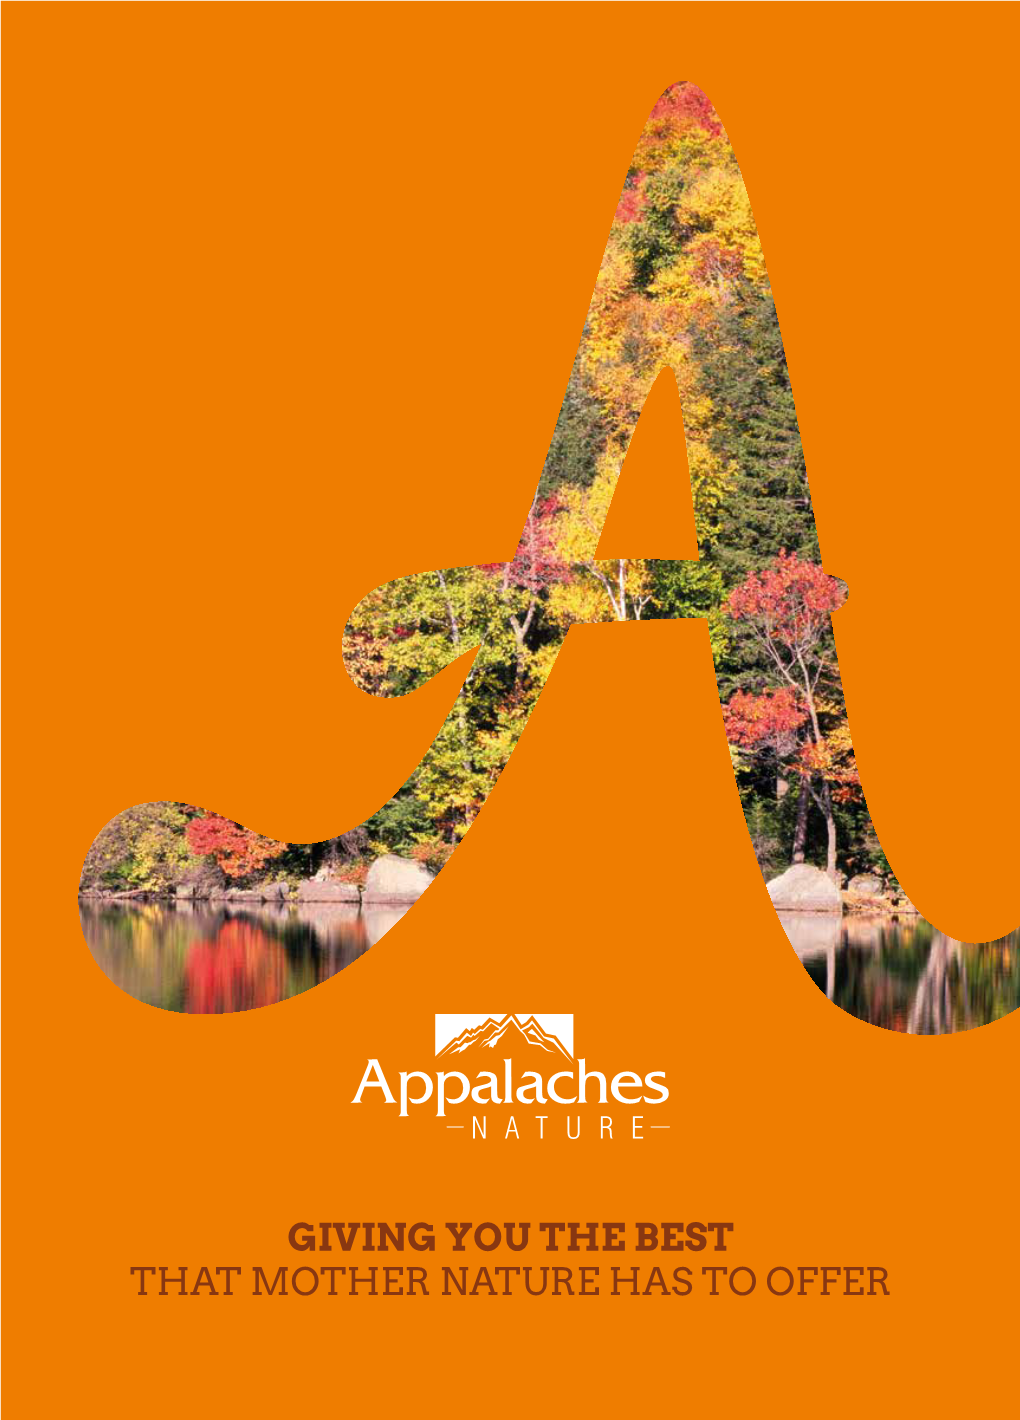 Appalaches Nature: the New State-Of-The-Art Site of a Food Company Specialised in Nature